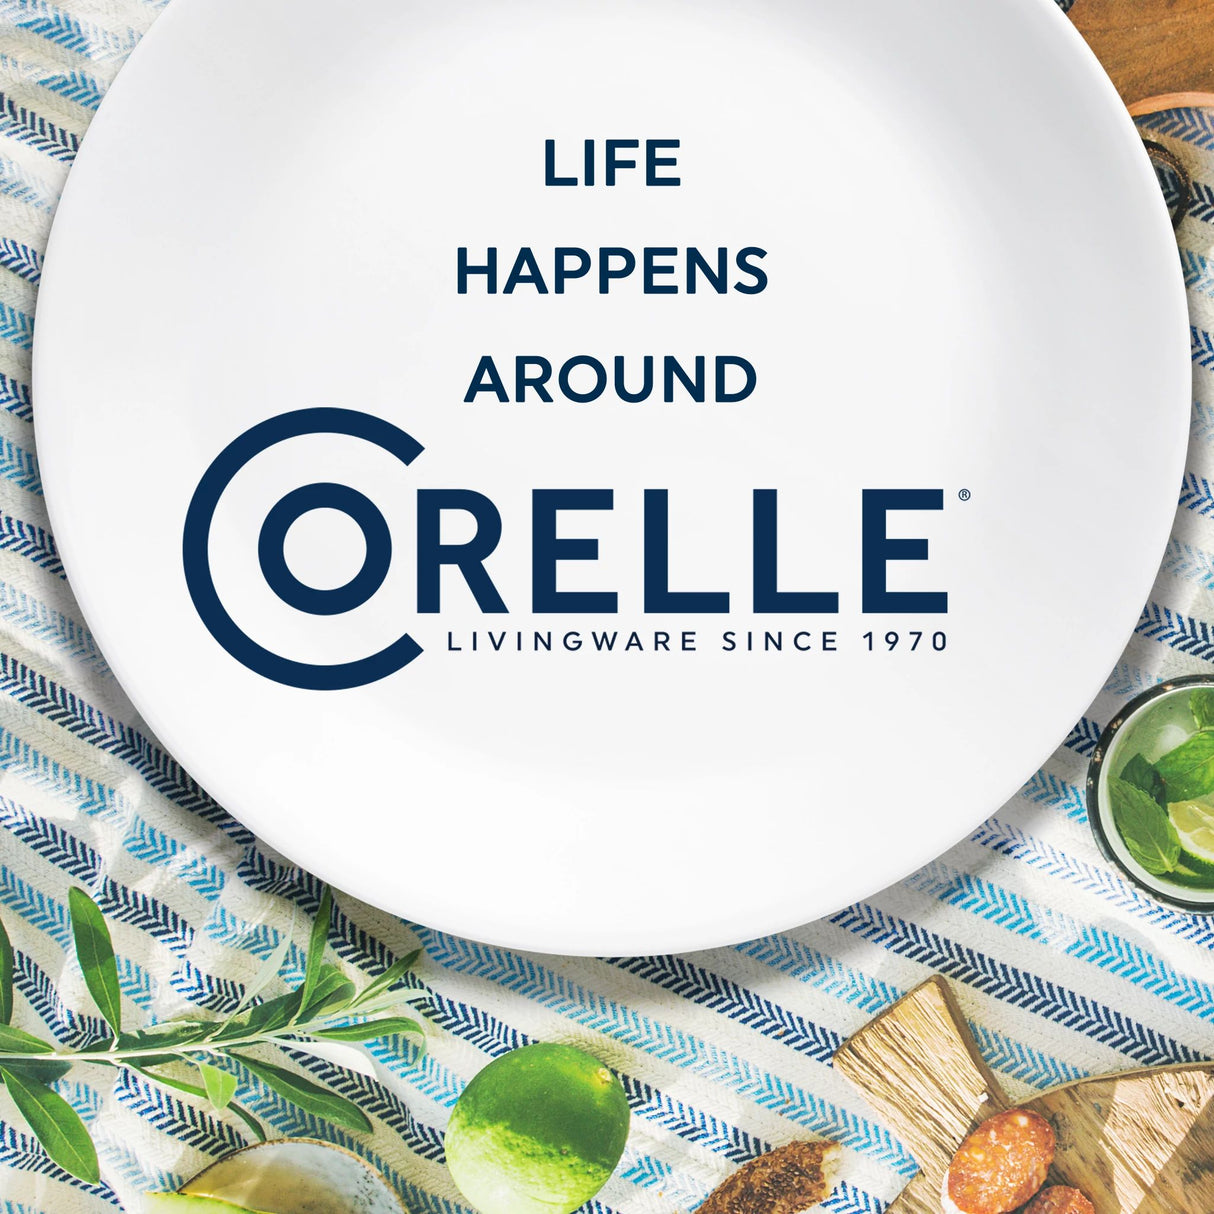  Corelle dinnerplate with text life happens around Corelle